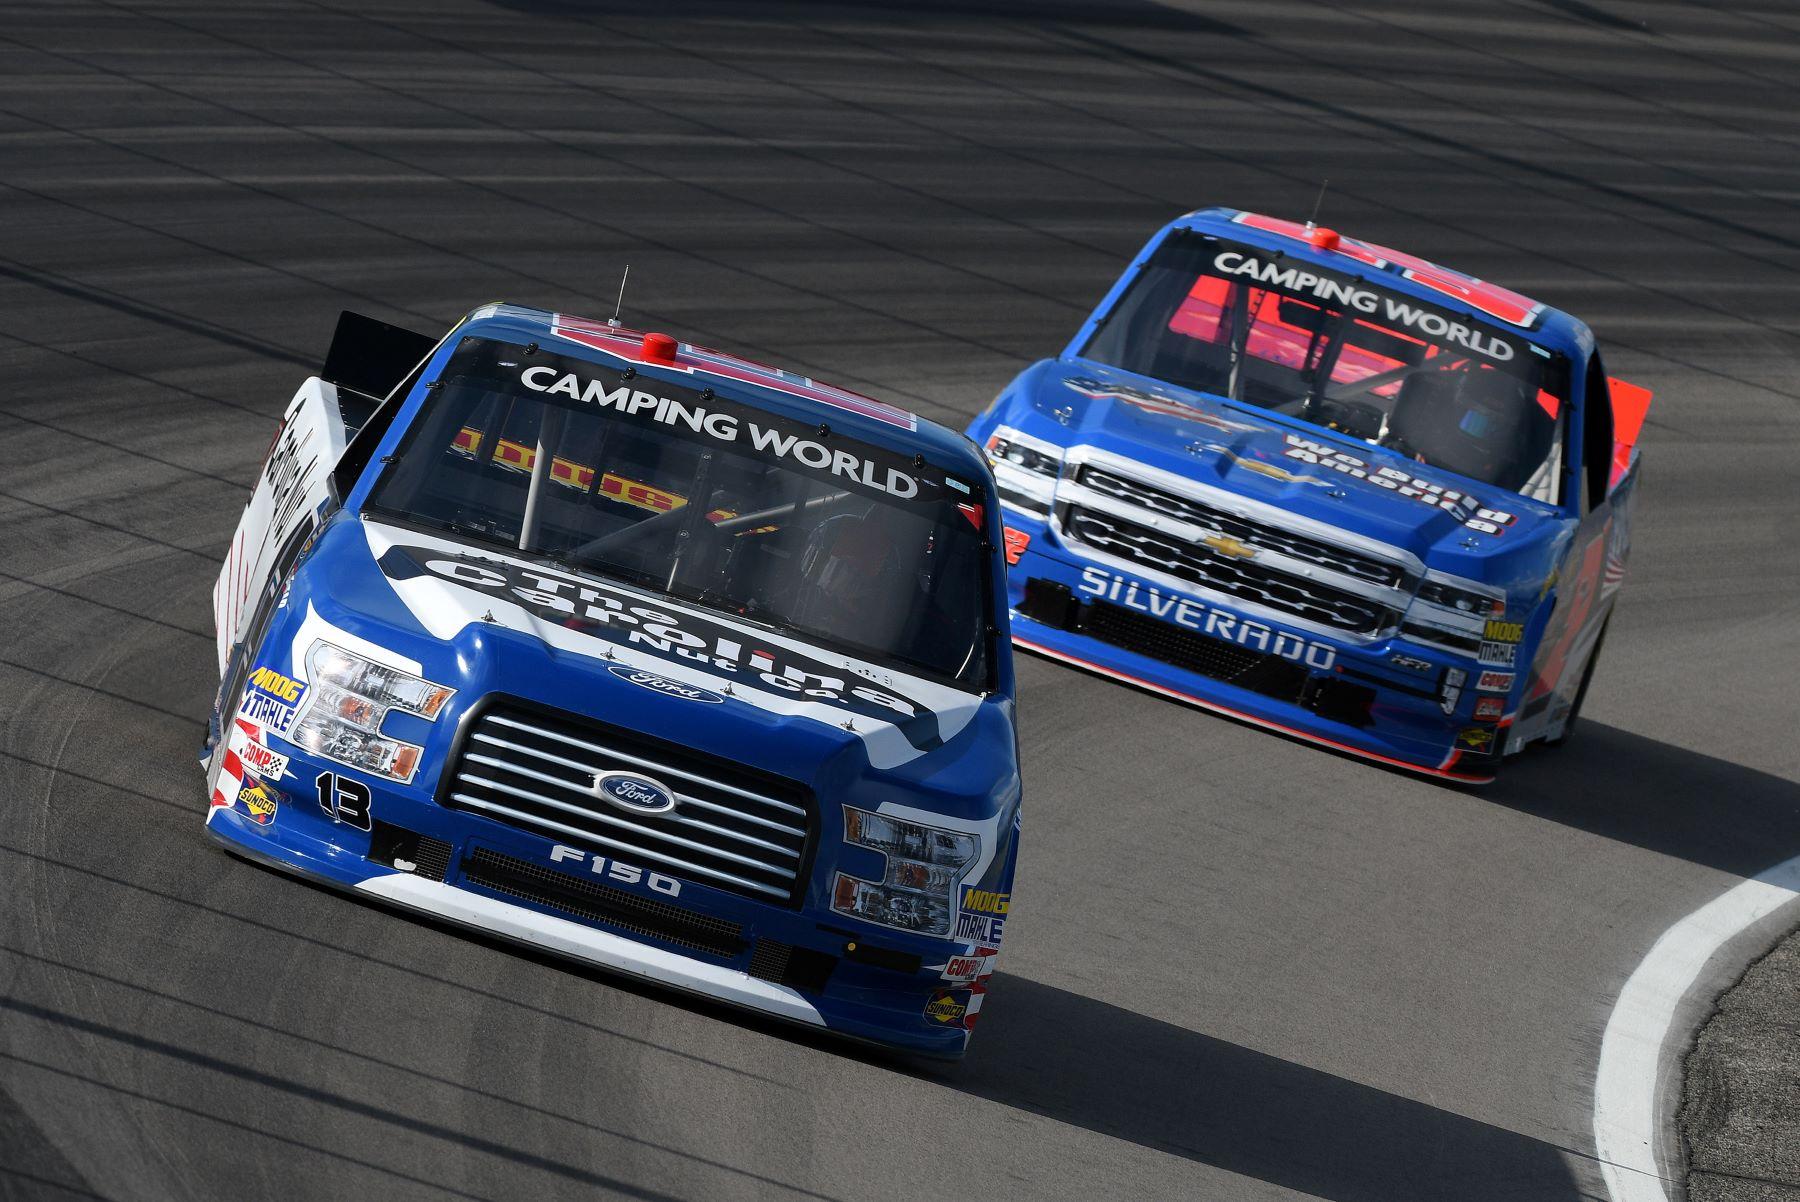 Ford F-150 and Chevy Silverado NASCAR trucks racing during Camping World Truck Series in Madison, Illinois